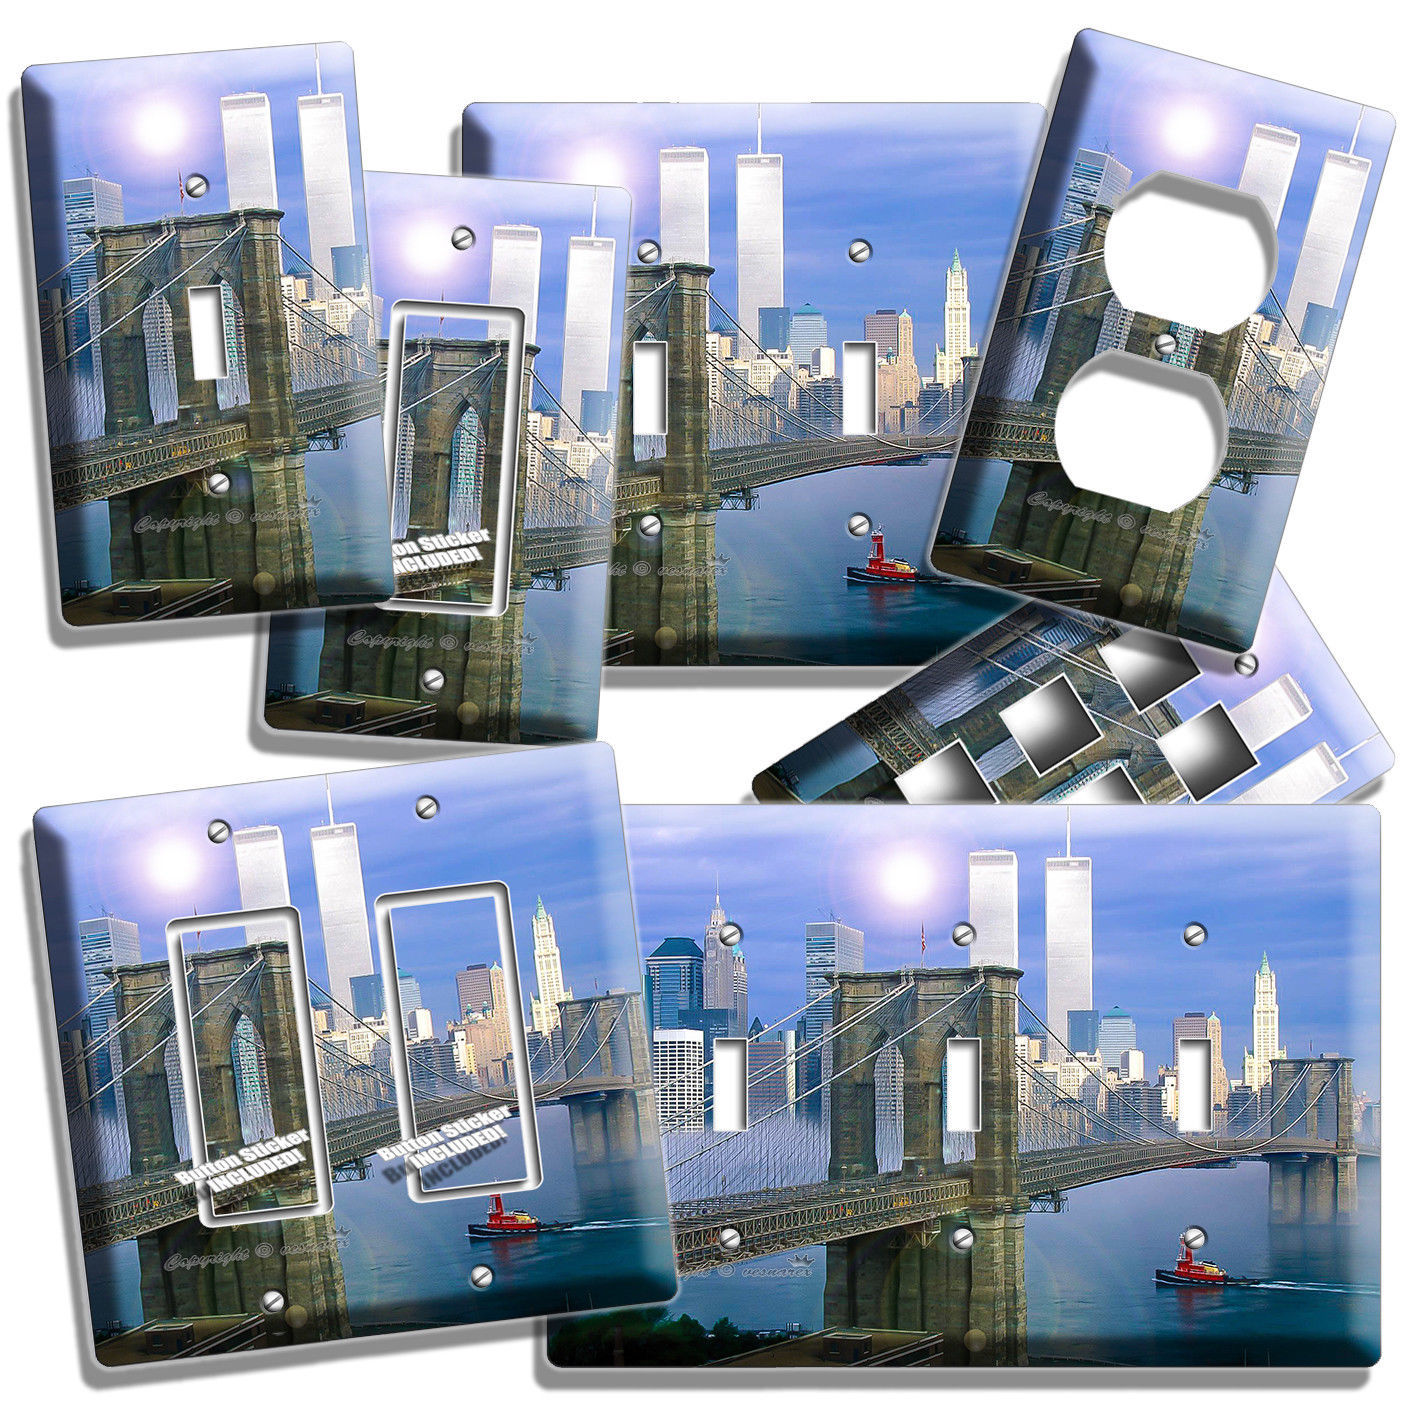 NYC NEW YORK CITY BROOKLYN BRIDGE TWIN TOWERS LIGHT SWITCH PLATE OUTLET HD DECOR